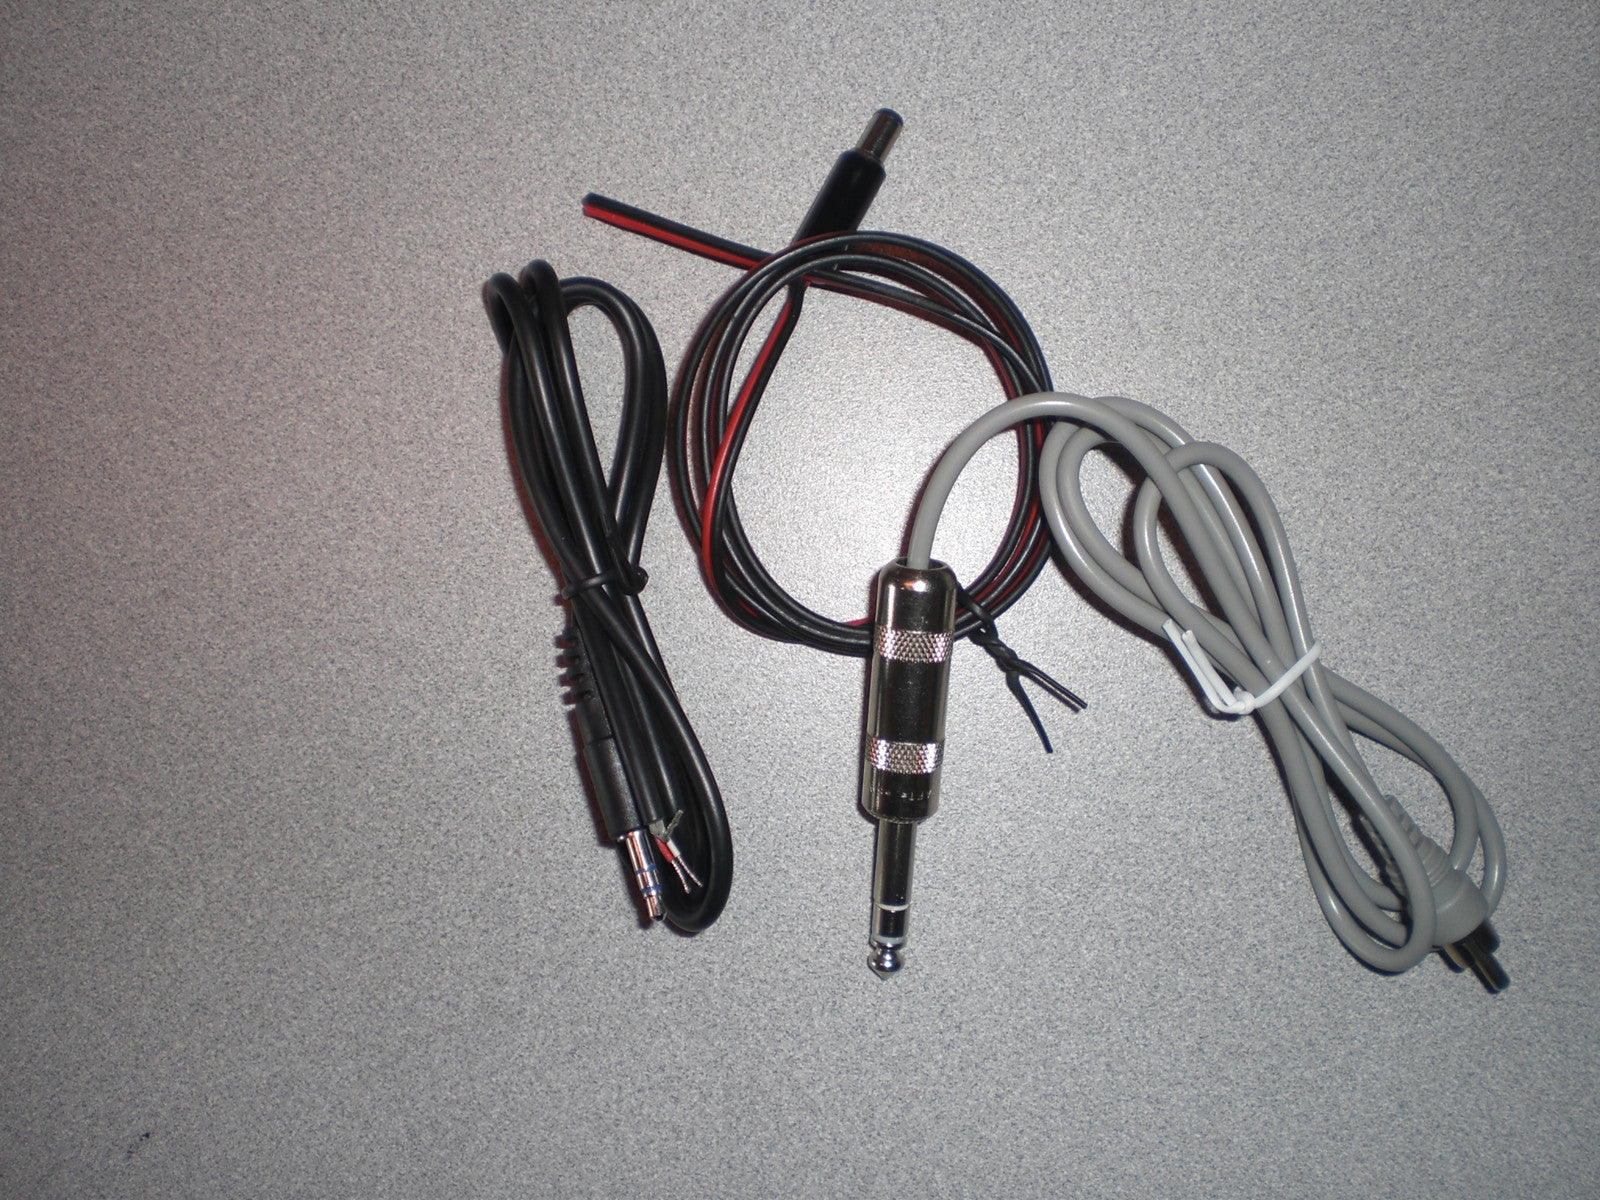 HKA Cable Set with Shielded Metal 1/4 inch Phone Plug To Rig (Set of 3 Cables). Cable for Both K-5 and CMOS 4 Morse Keyers.